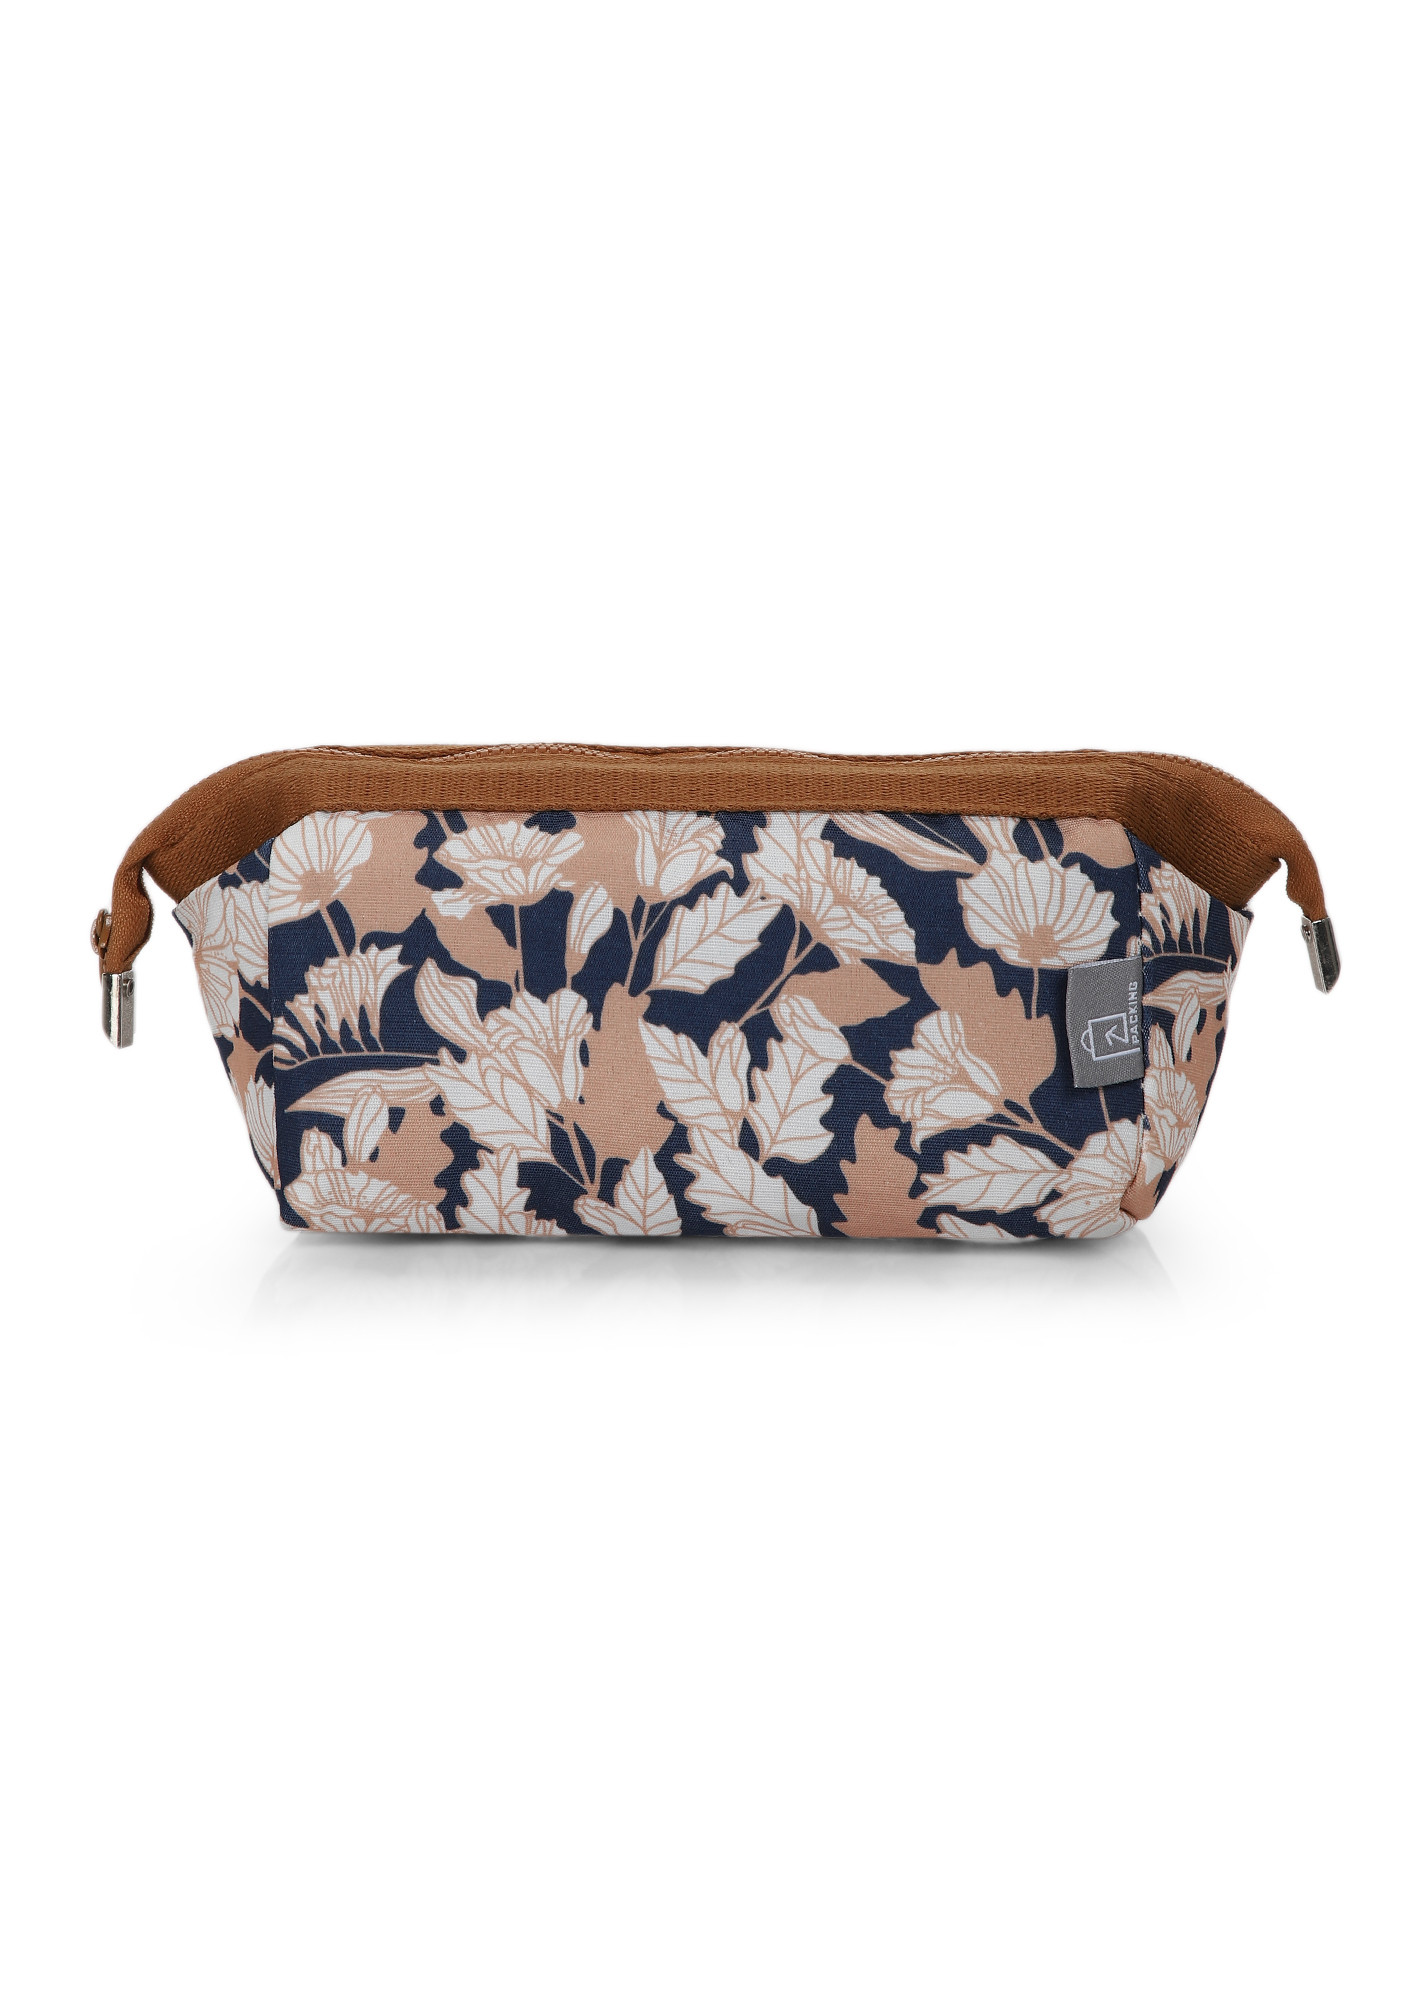 VALLEY OF FLOWERS MULTICOLOR MAKE-UP POUCH 